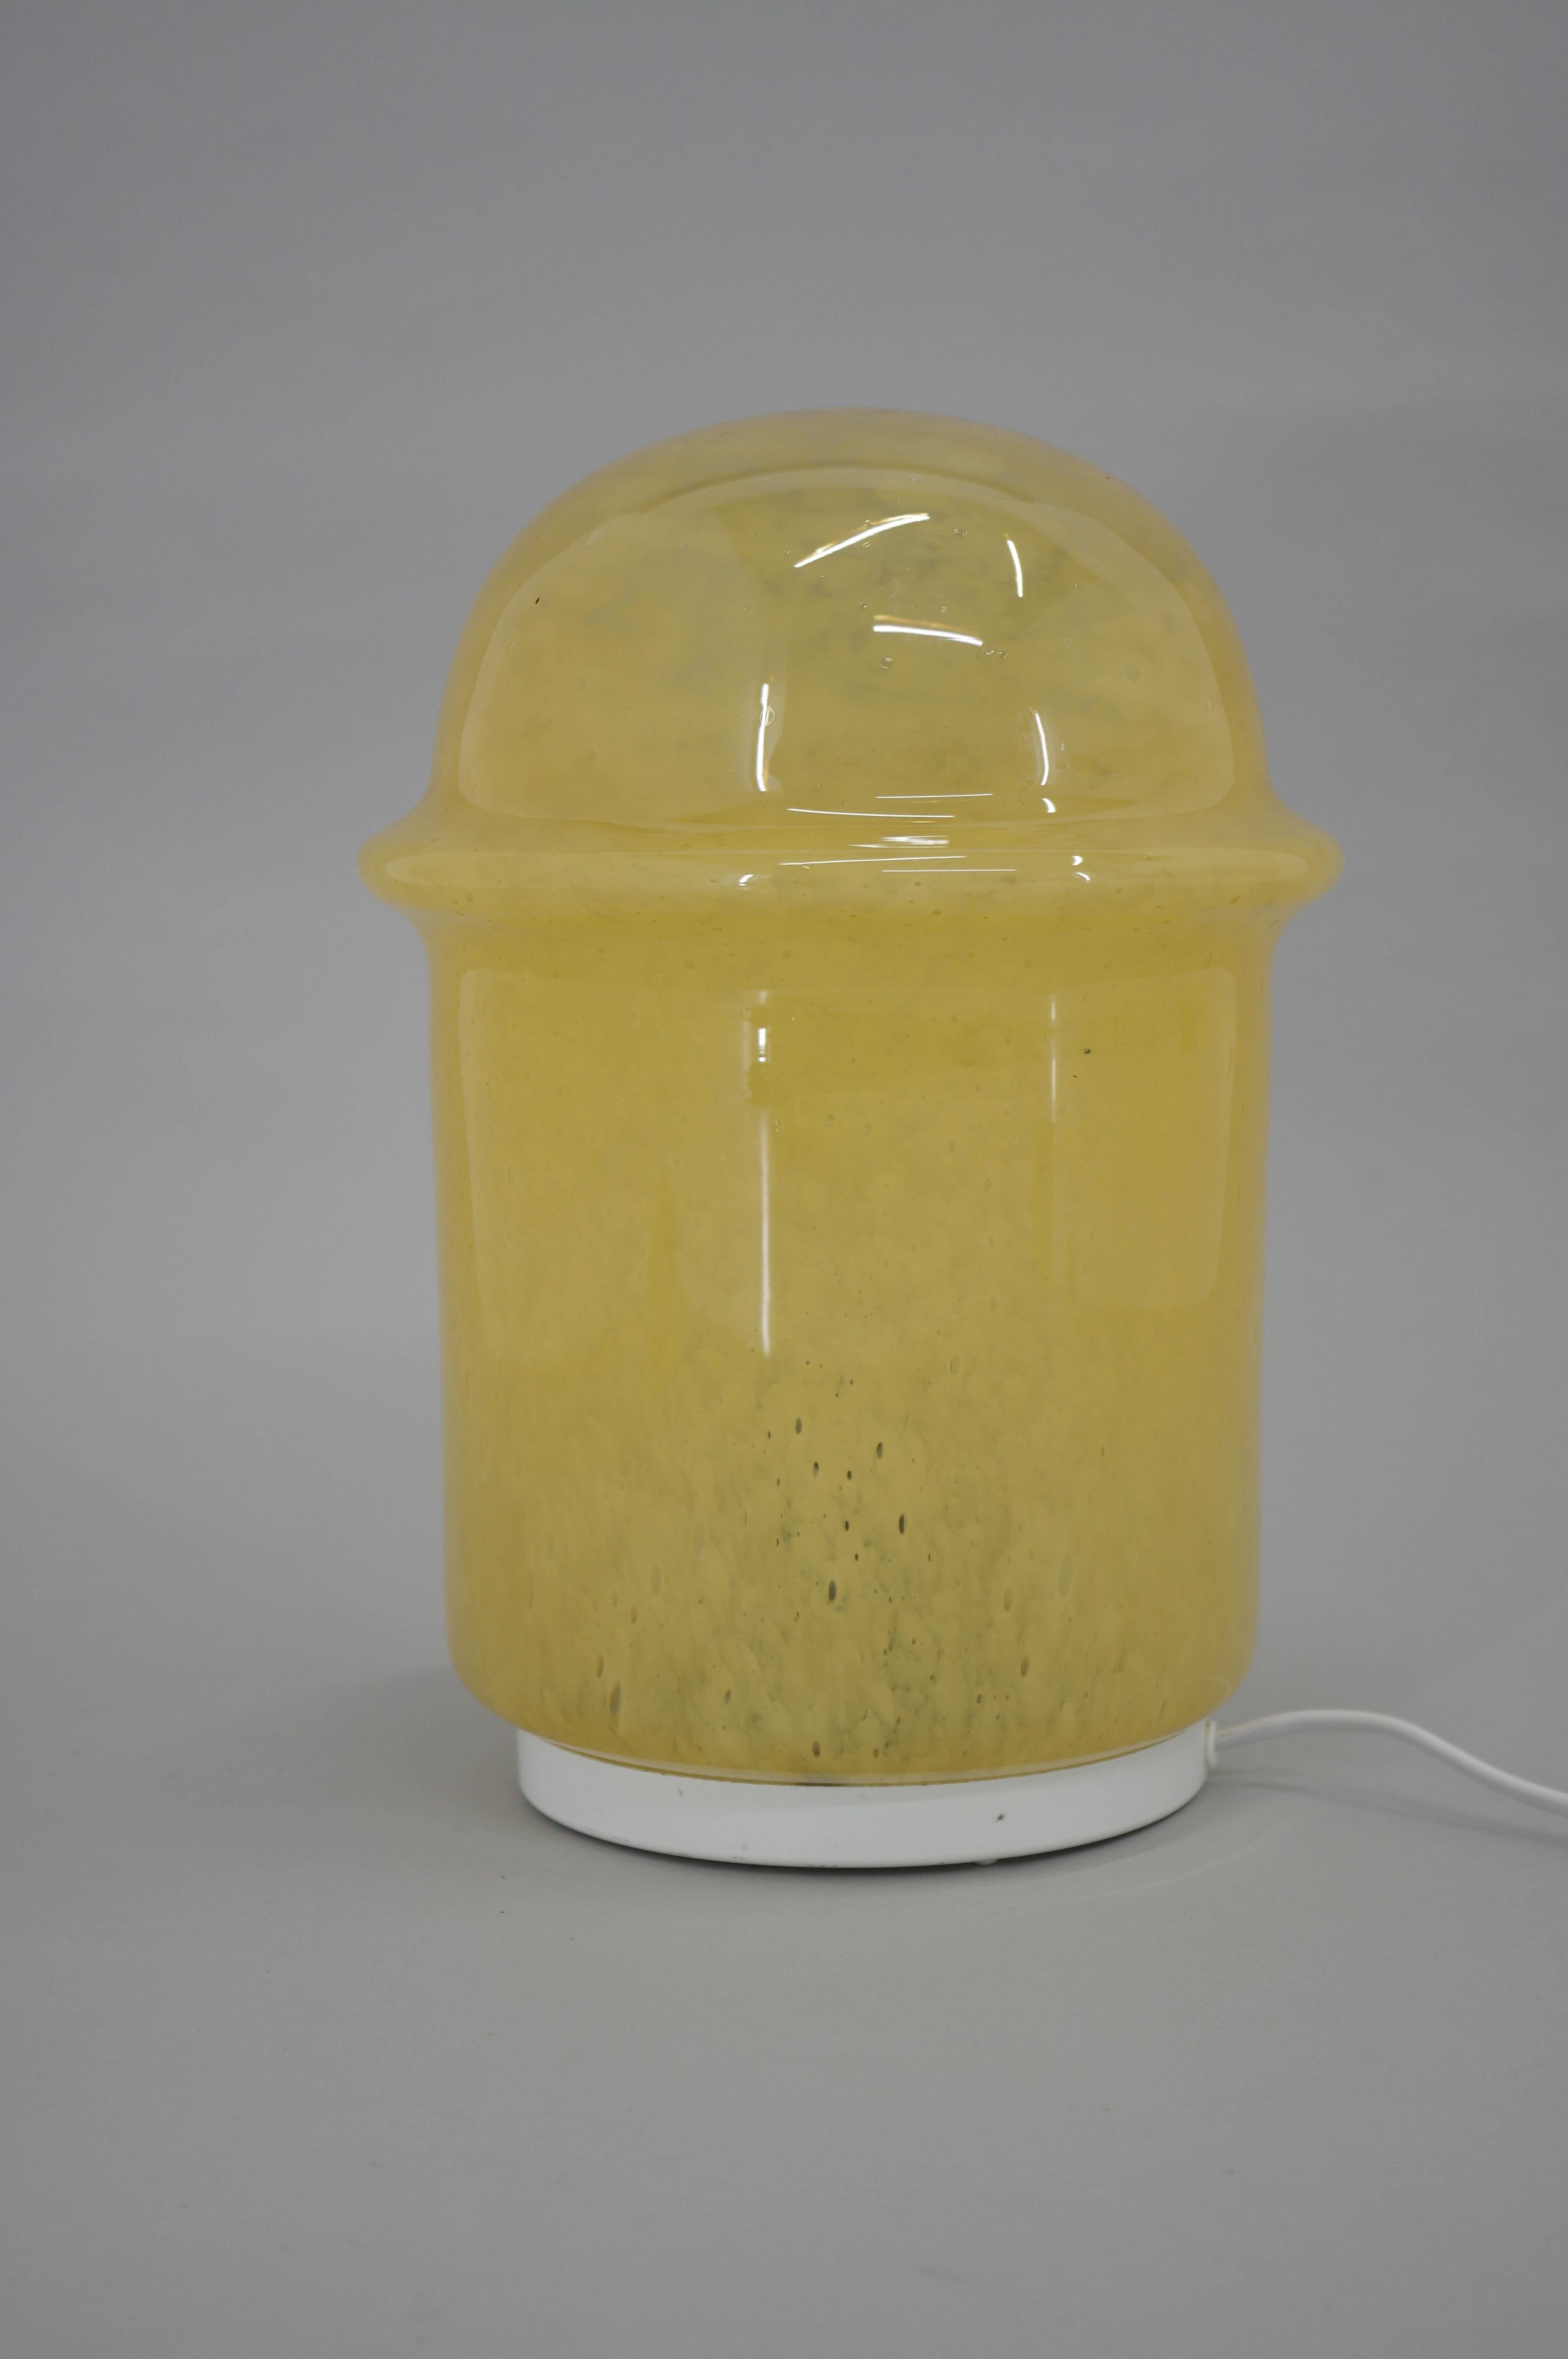 Space Age yellow glass table or floor lamp made in Czechoslovakia in 1970s. One crack on bottom part of glass (visible on photo) has no effect on function.
1x75W, E25-E27 bulb
US plug adapter included